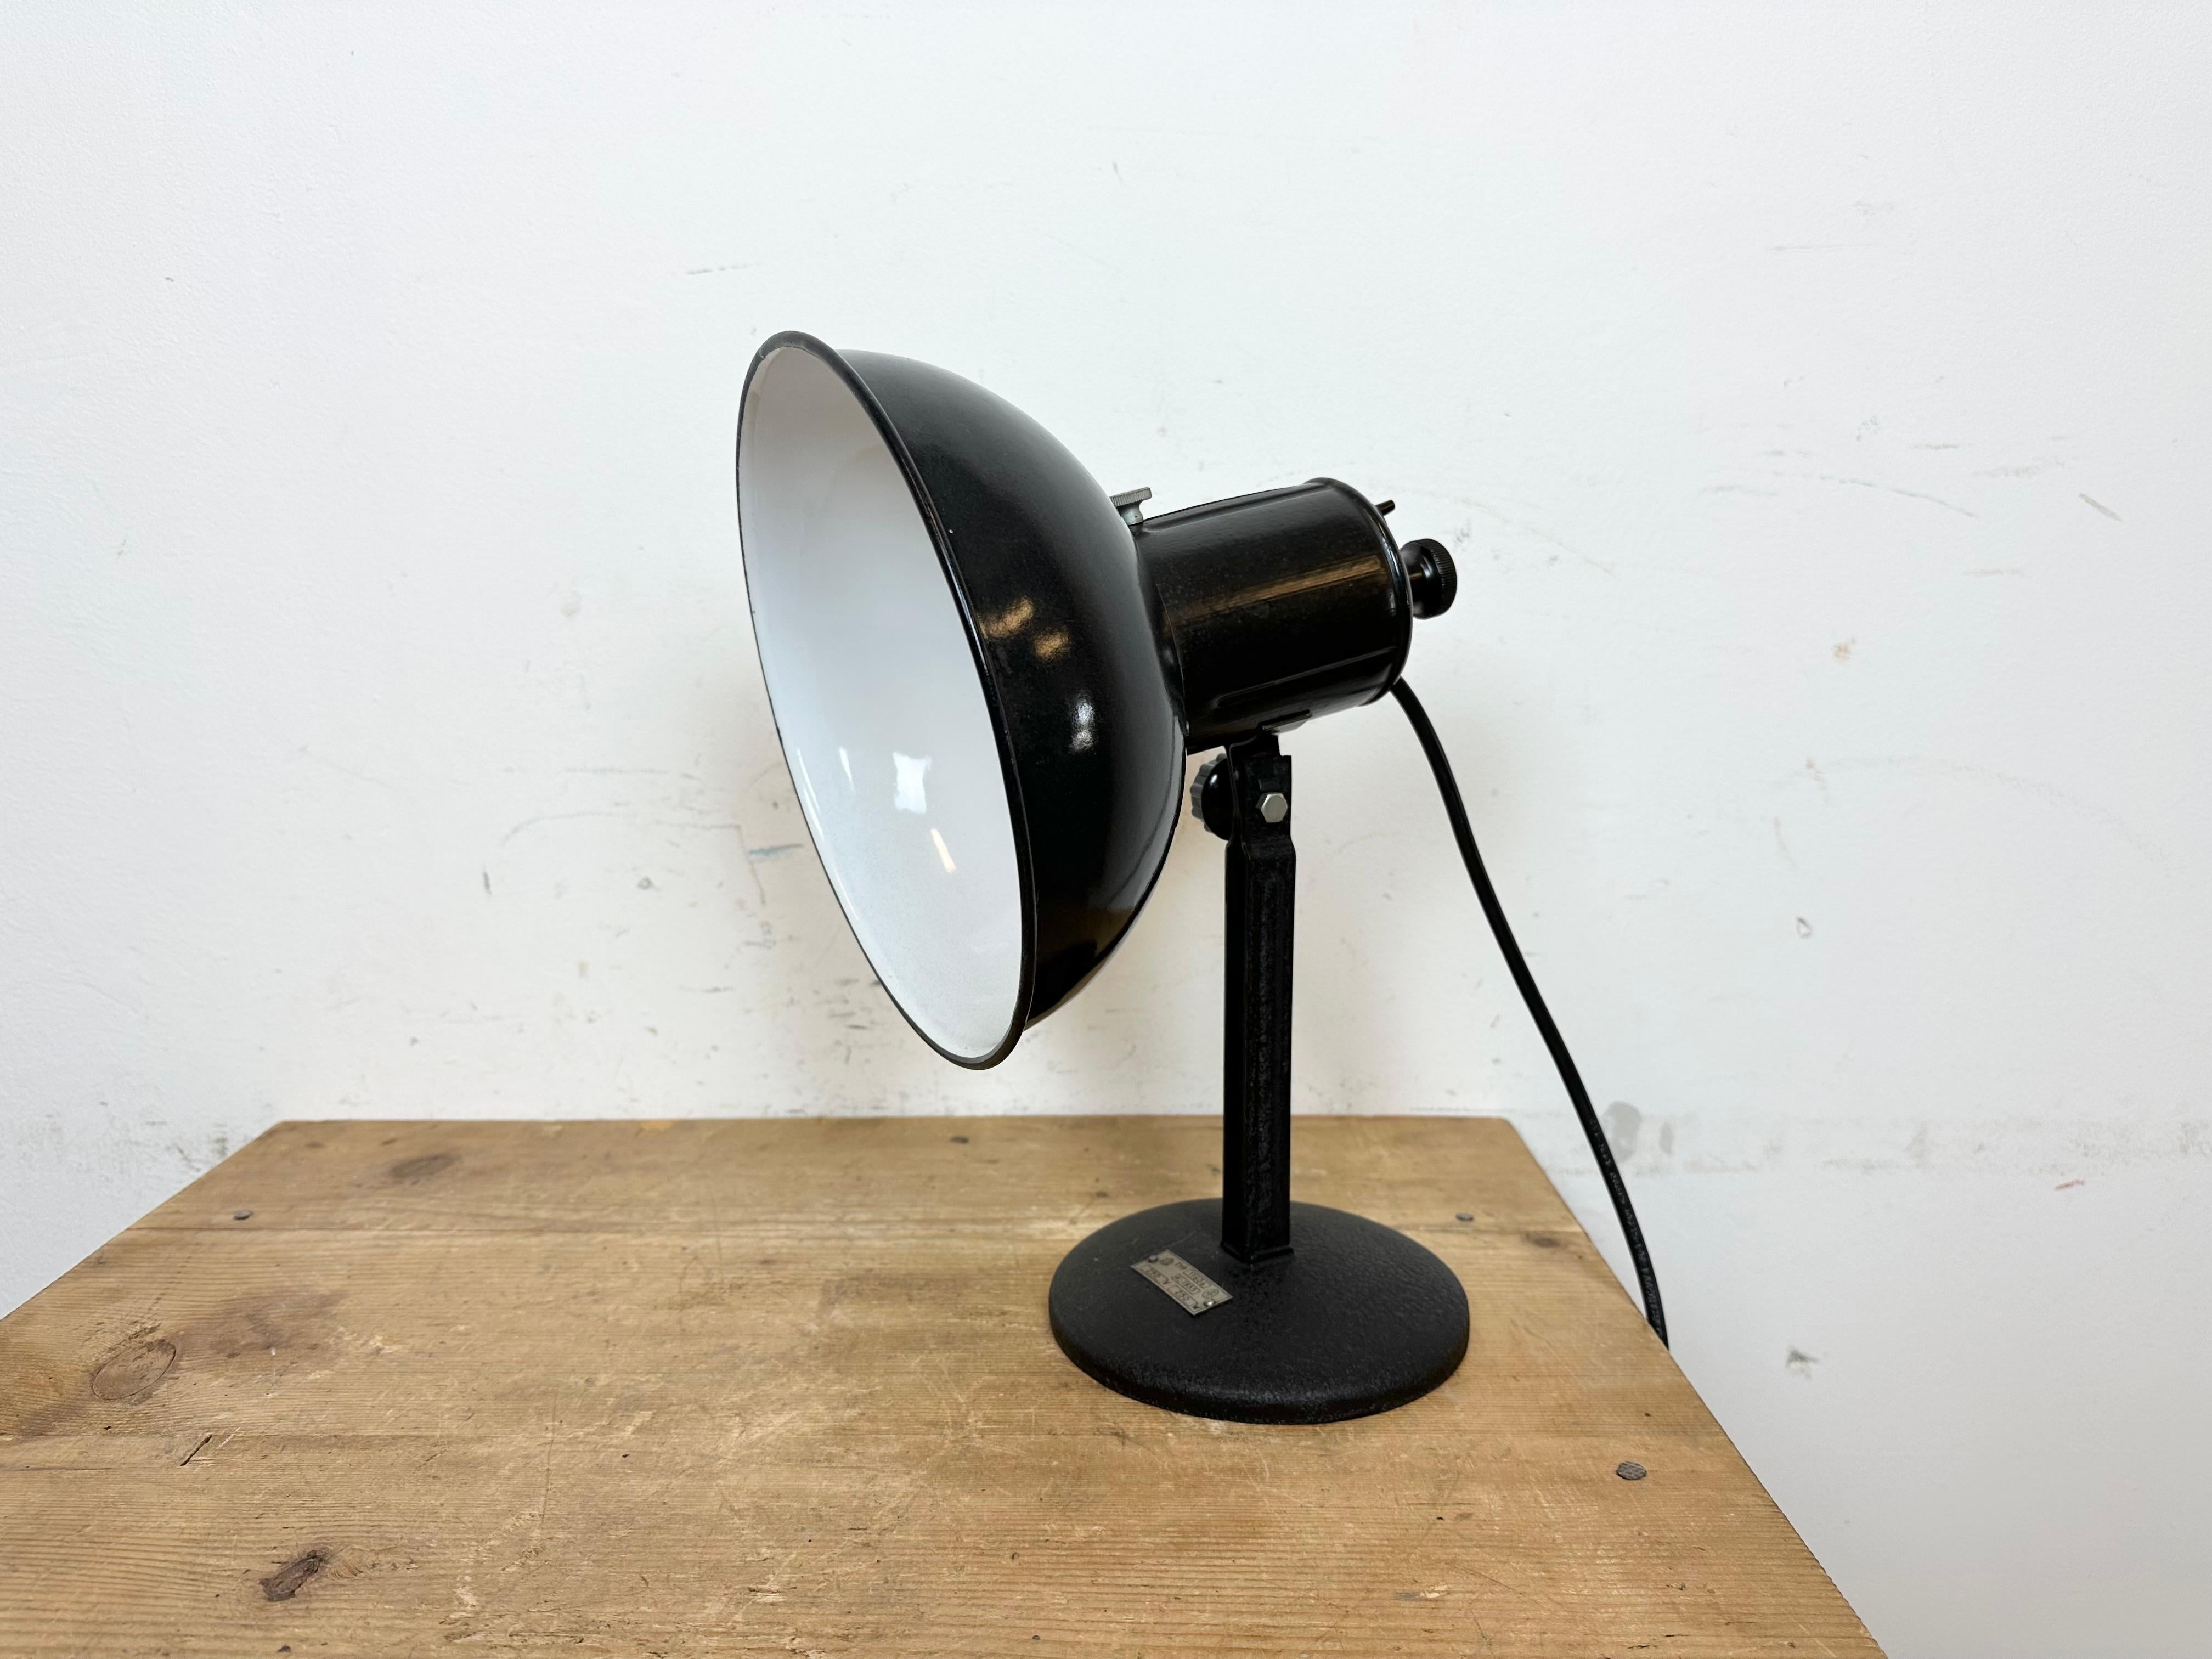 Vintage Industrial adjustable table lamp from former Czechoslovakia made during the 1950s. Was used in photo studios. It features a black enamel shade with white enamel interior an iron arm and base.The original porcelain socket requires standard E